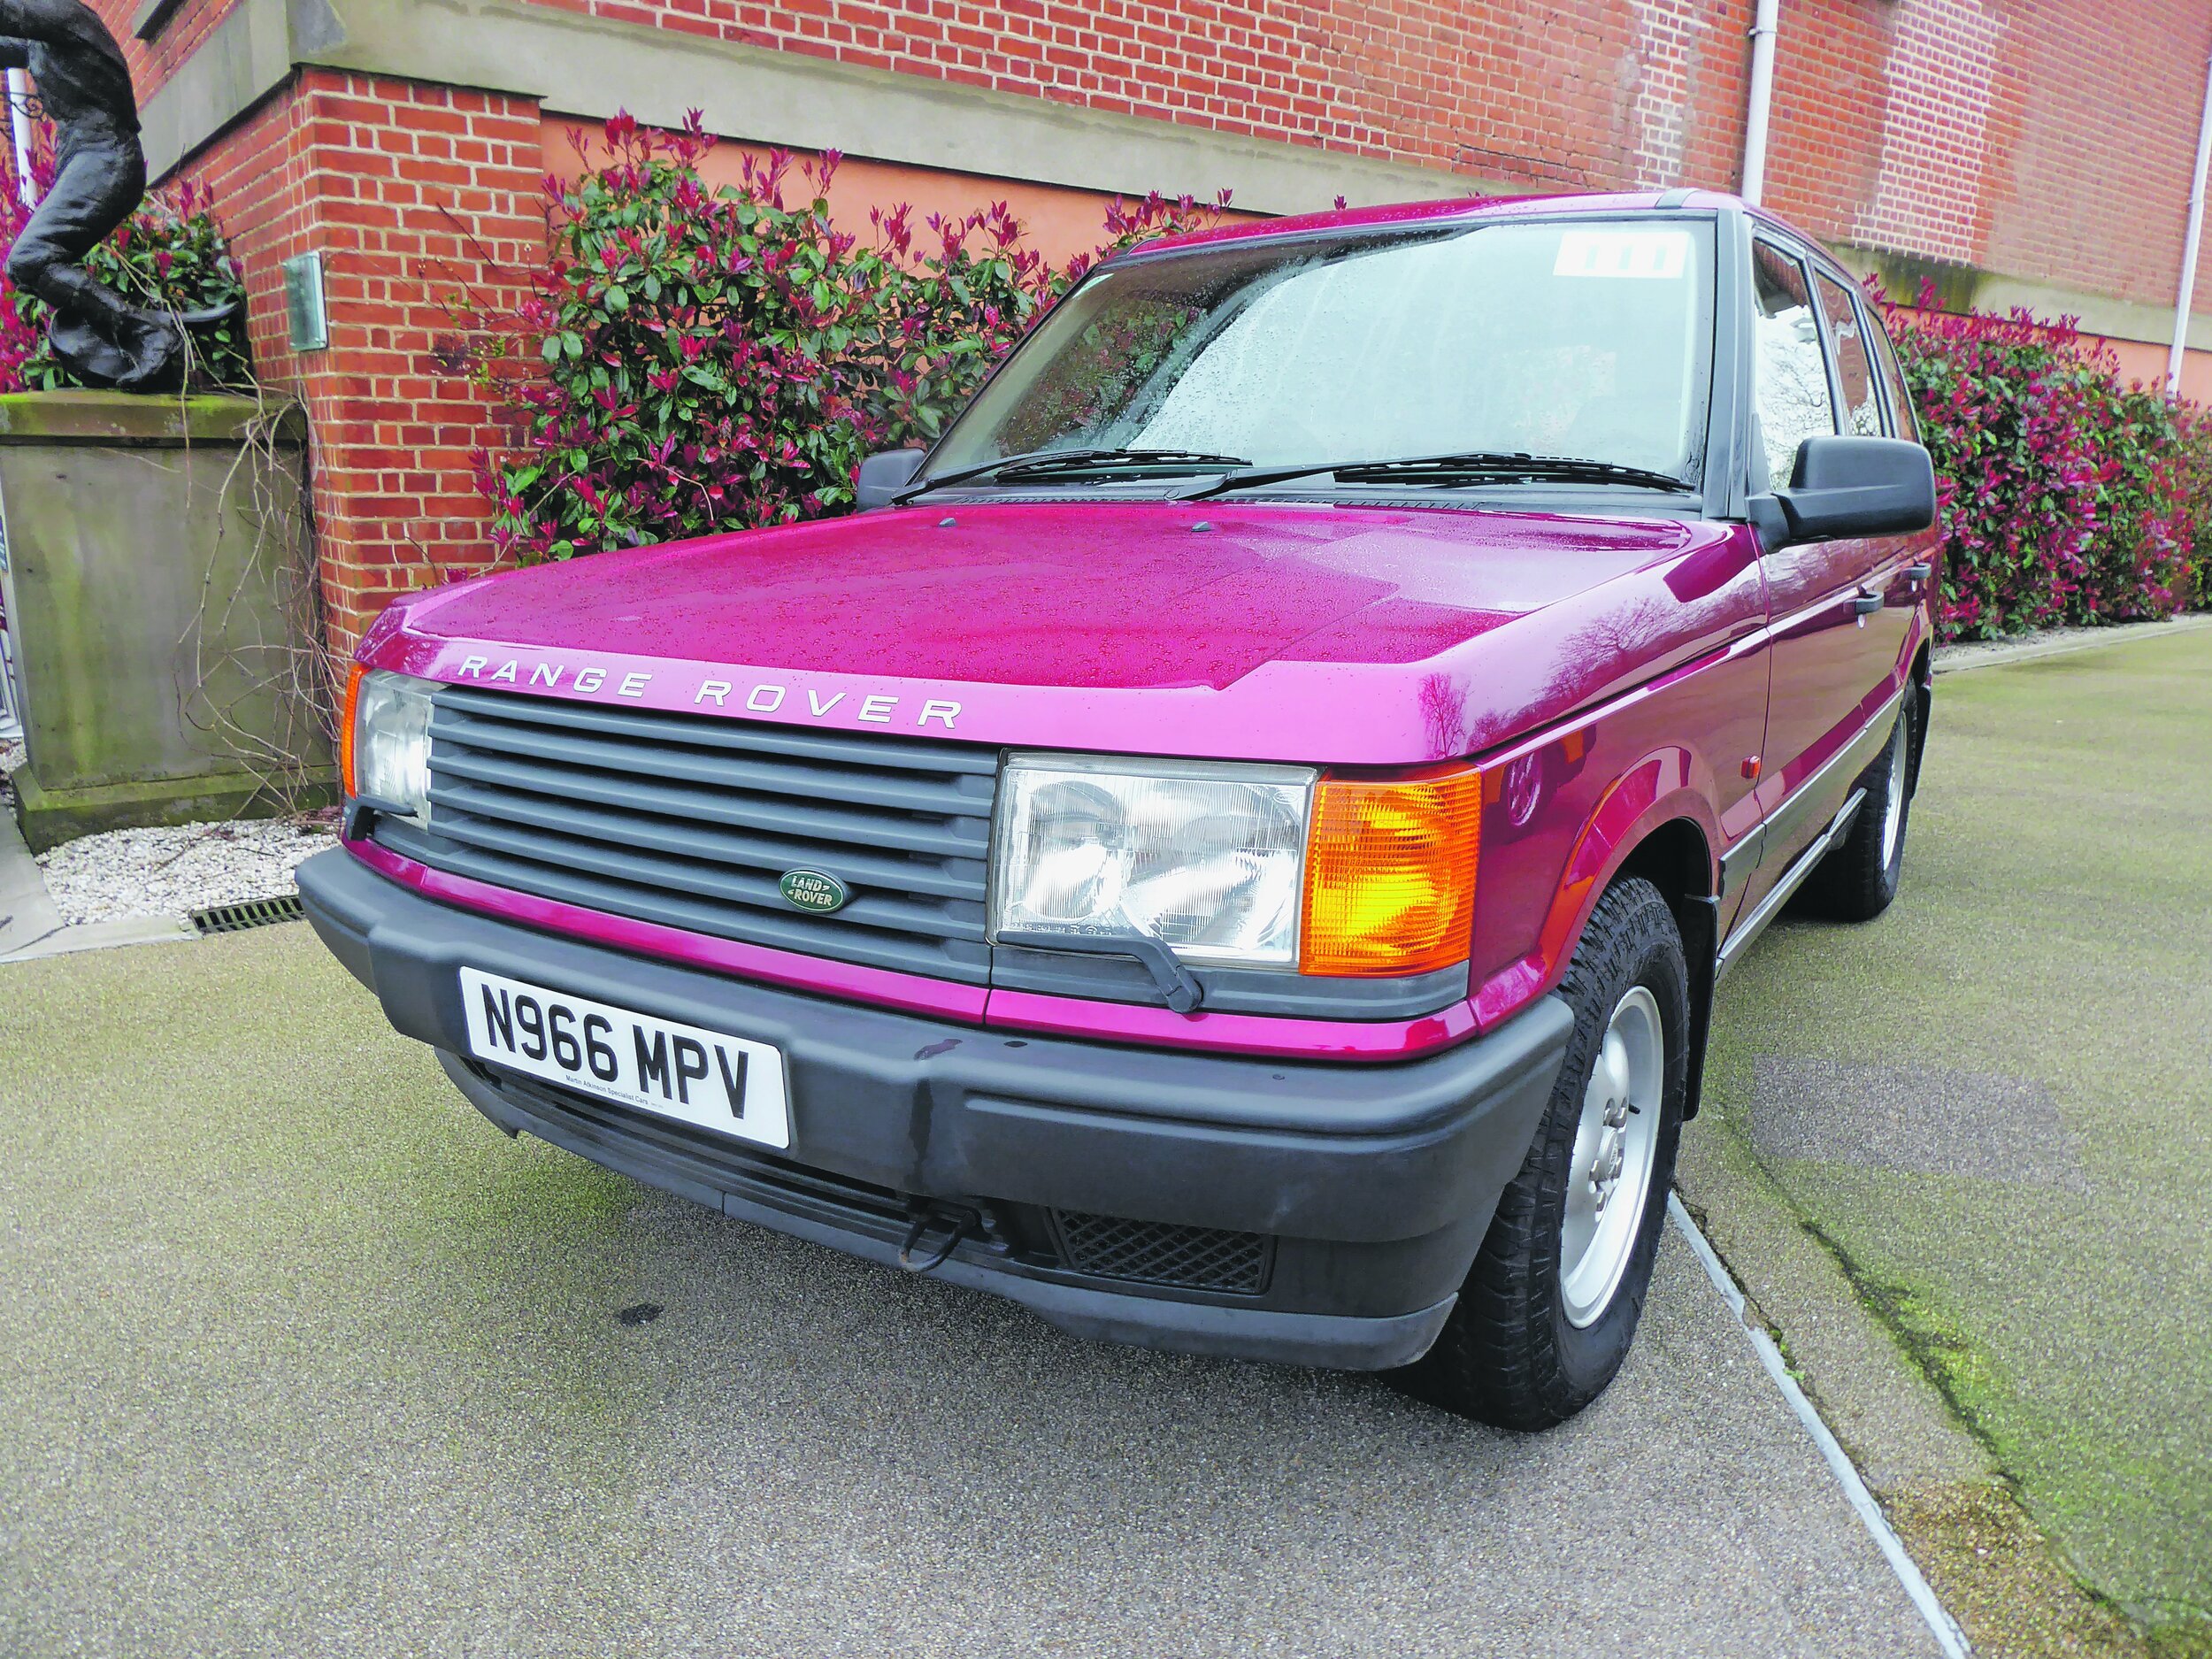 Low mileage Range Rover (P38) was well-bought at auction